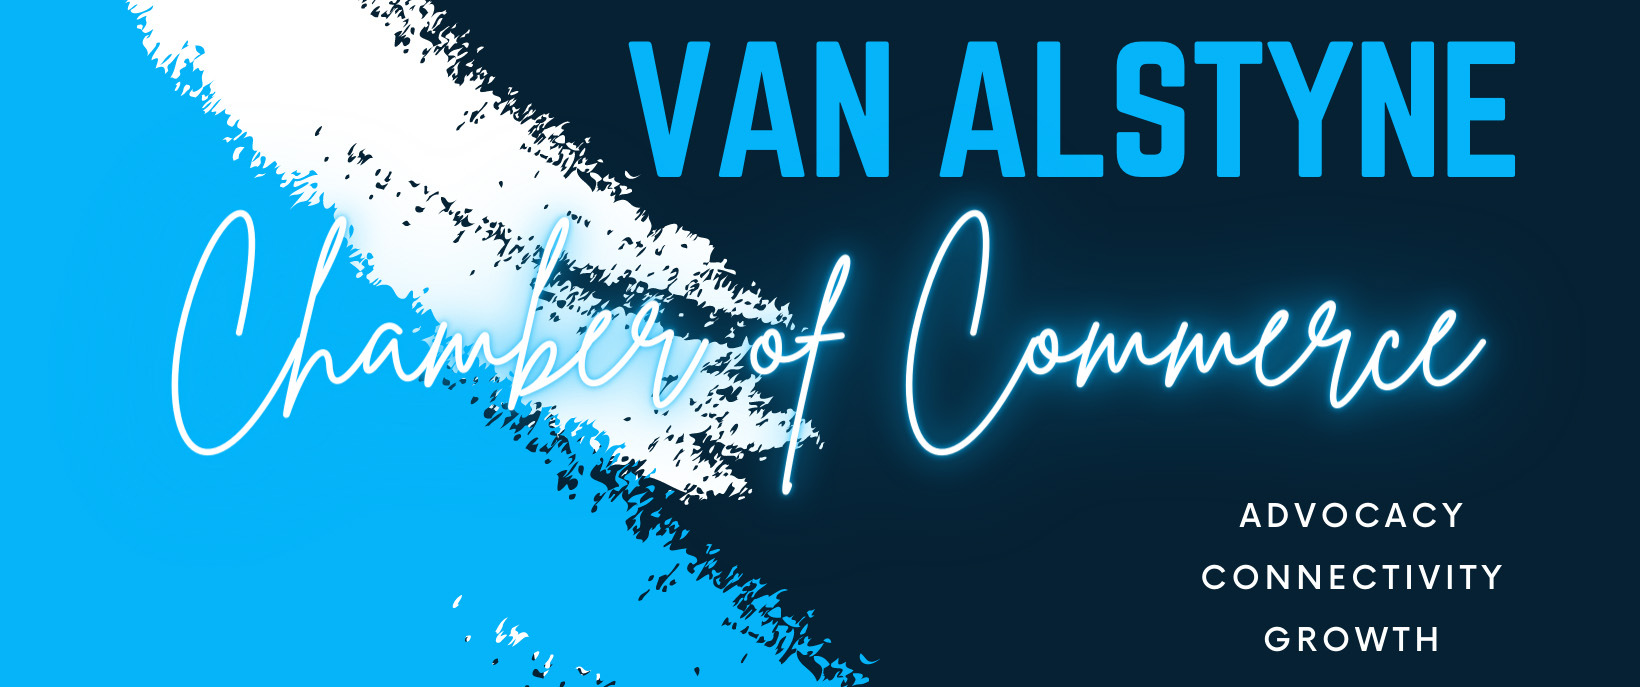 Van Alstyne Chamber of Commerce - Advocacy - Connectivity - Growth